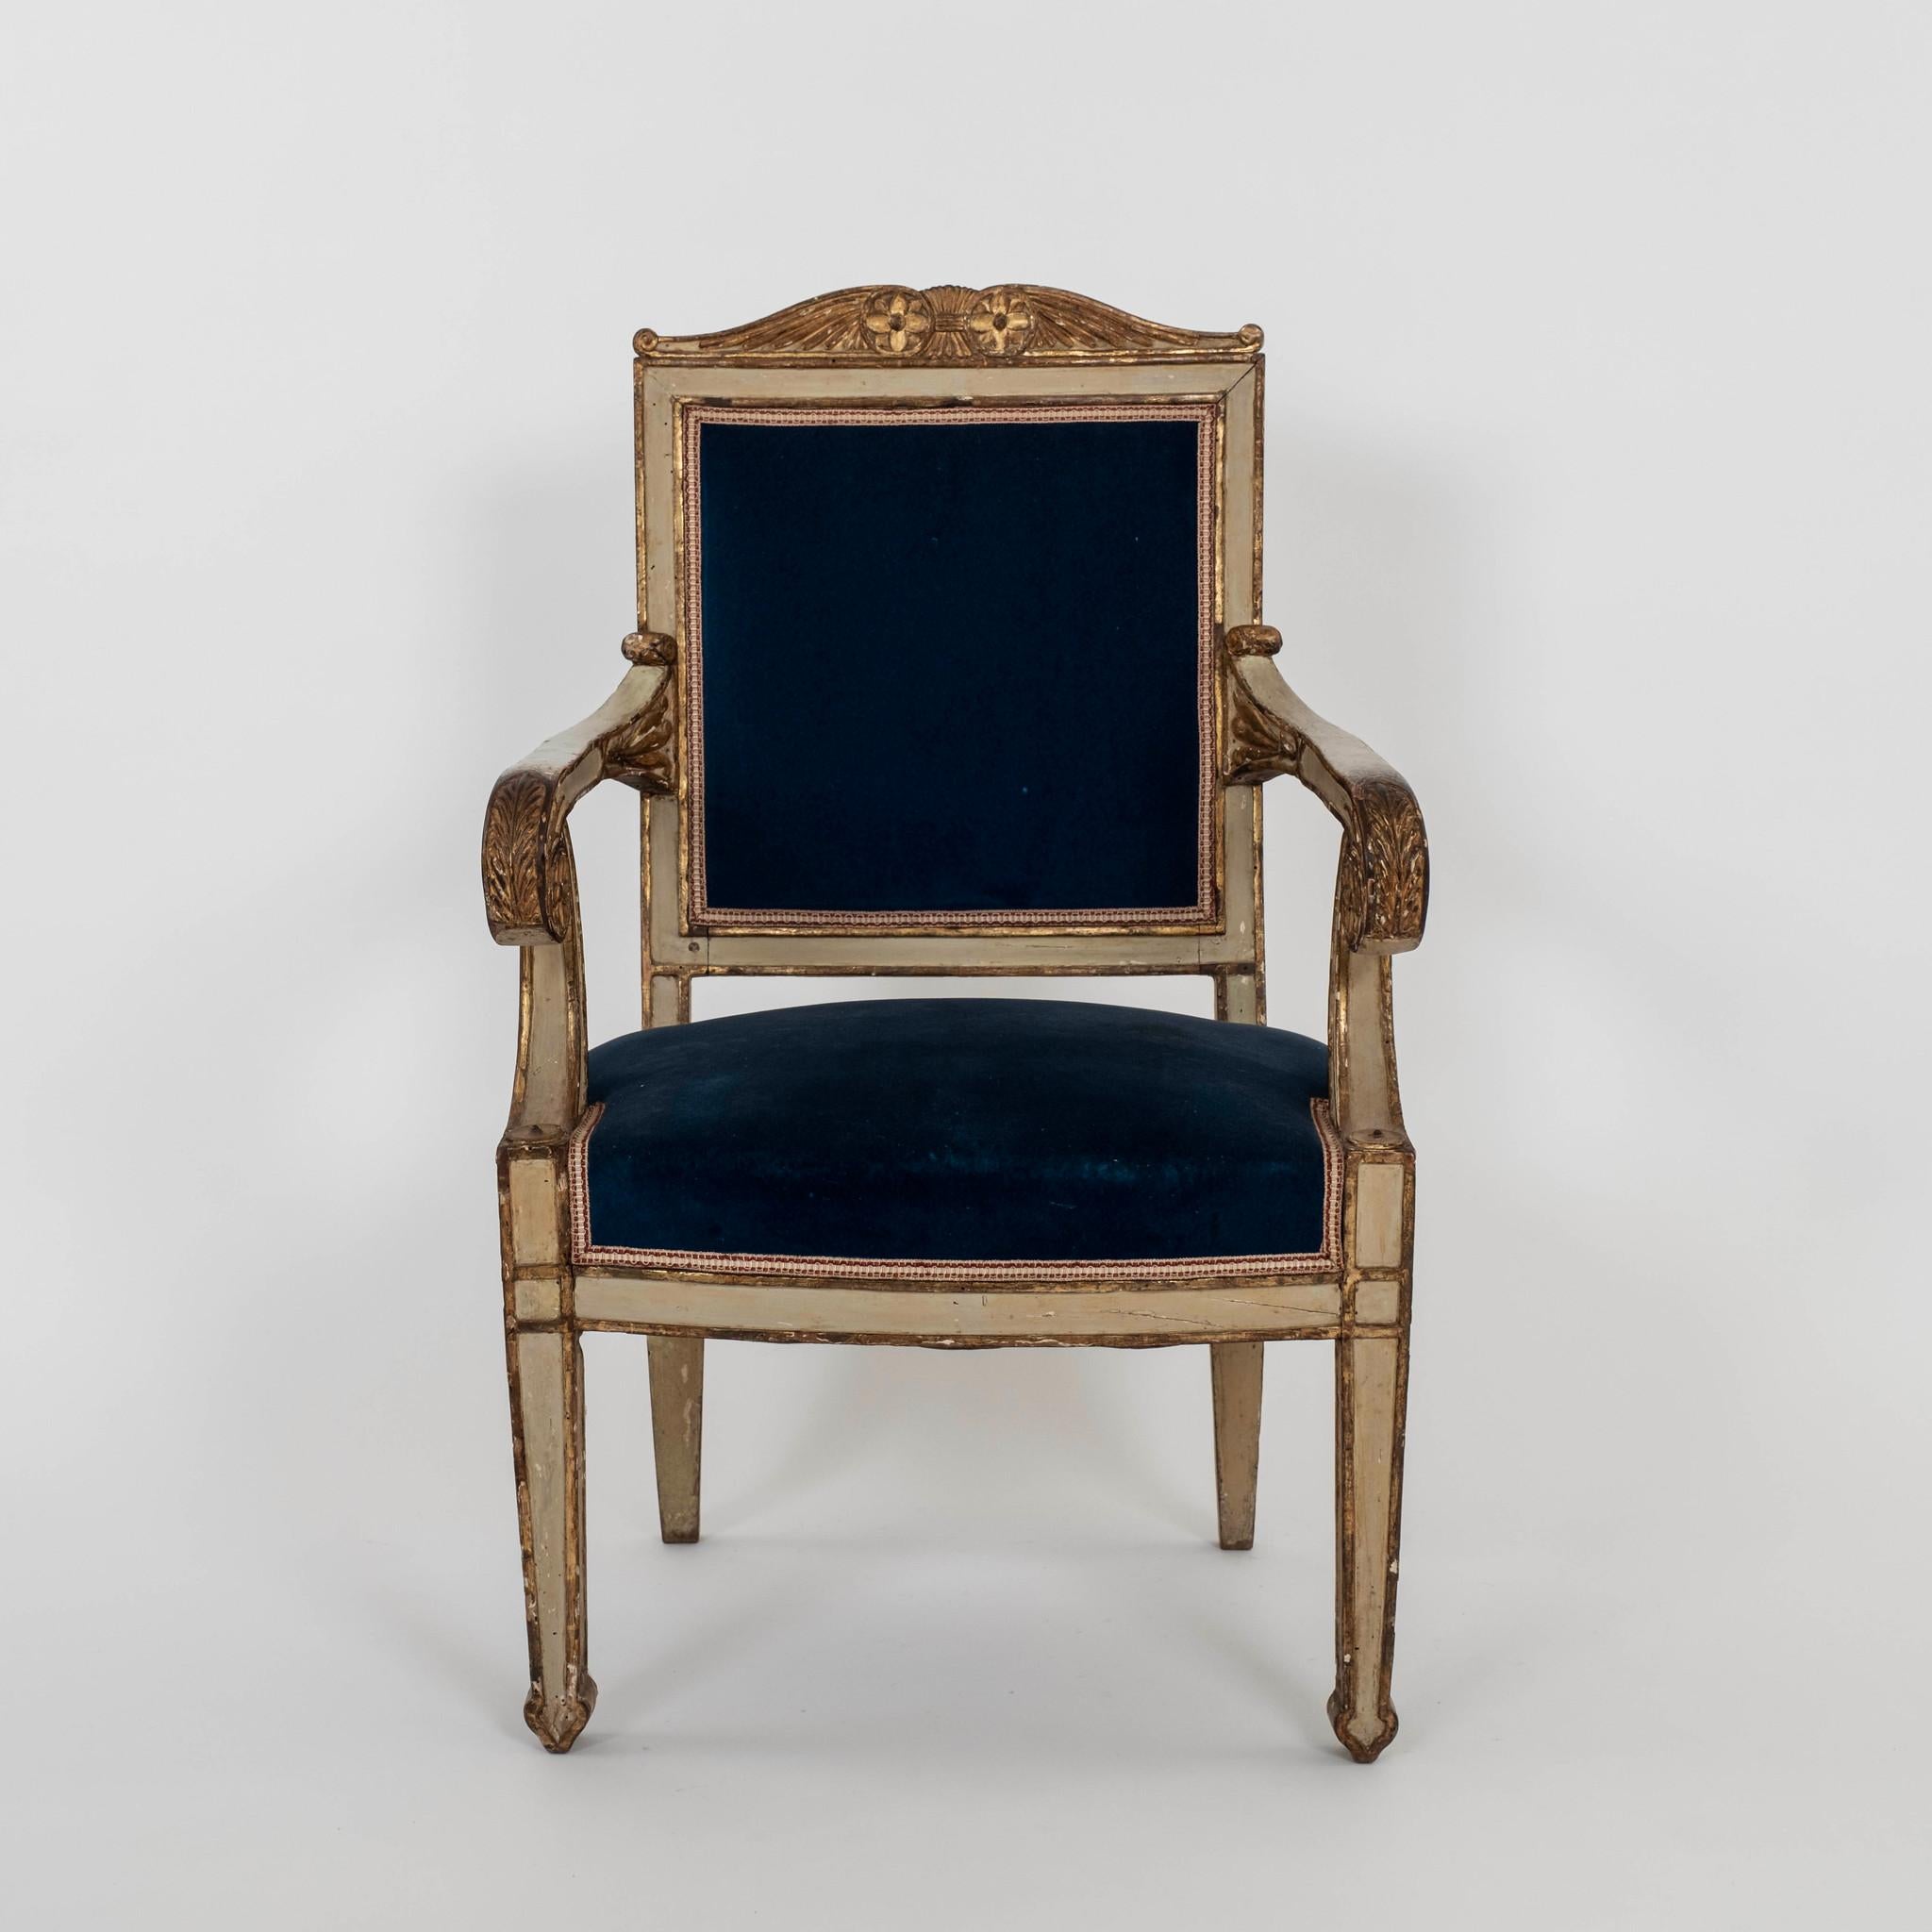 Pair of 18th century hand carved painted and parcel gilt Neoclassical armchairs in royal blue velvet. These chairs are also available C.O.M.